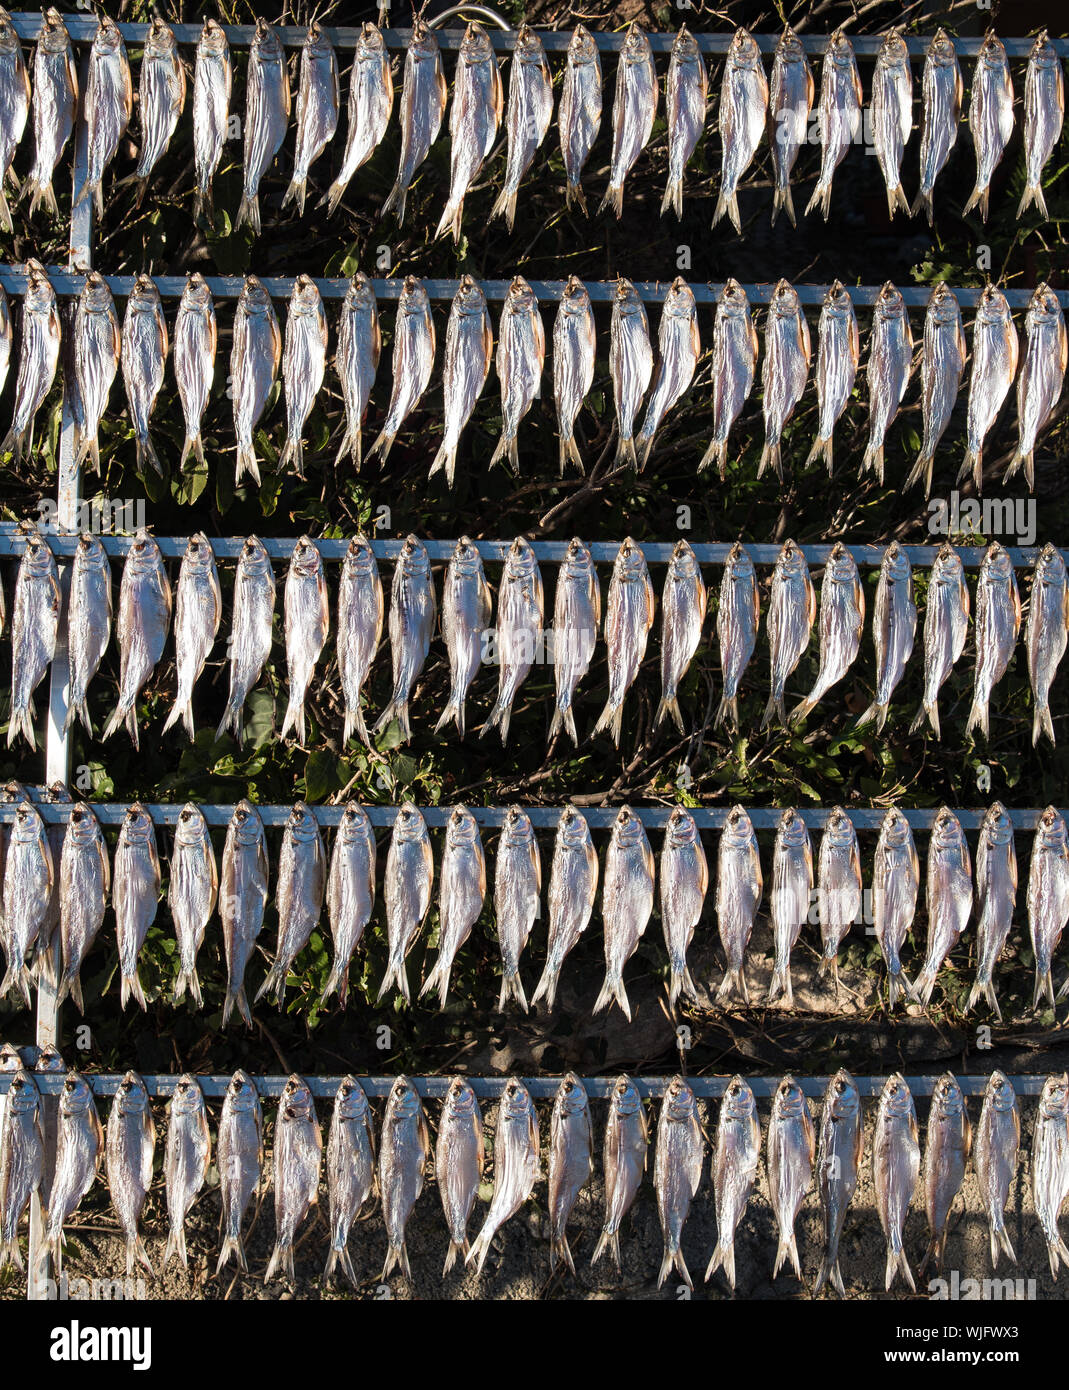 shad exposed to the sun to dry Stock Photo